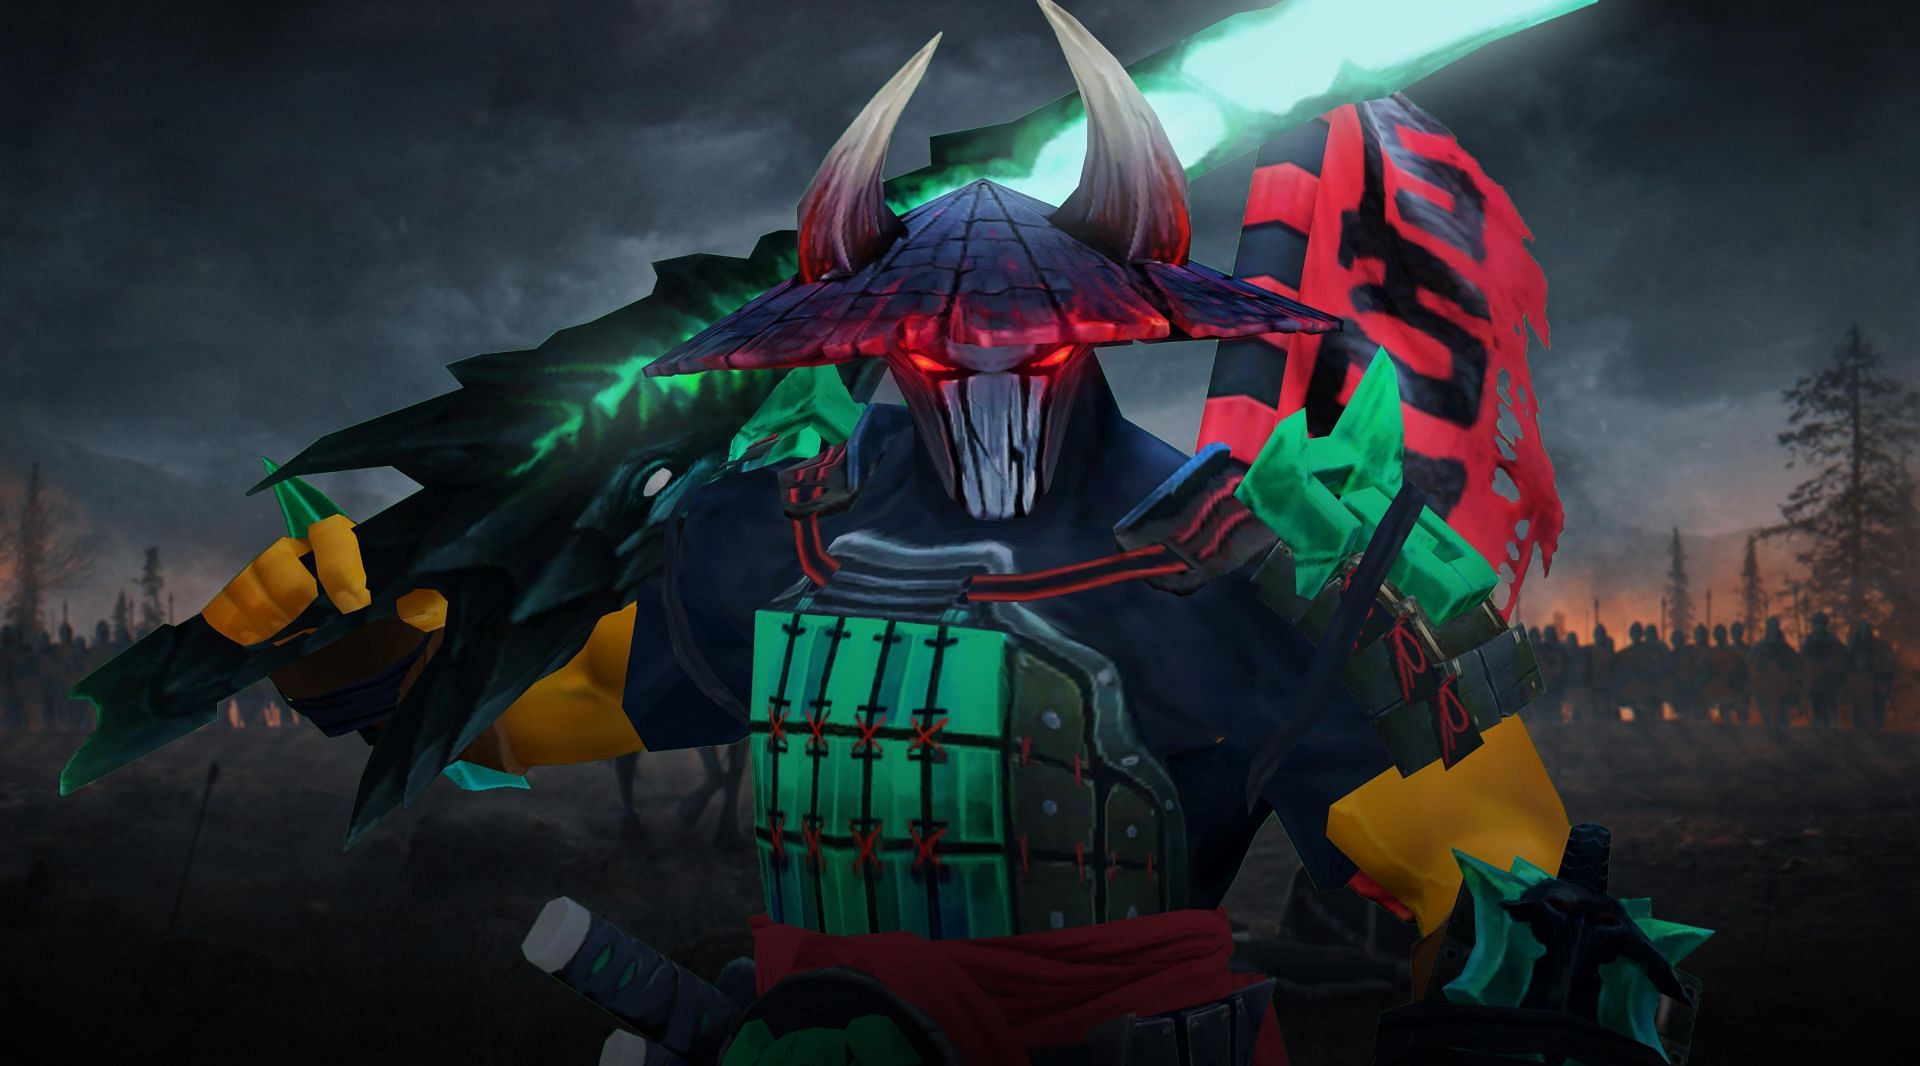 Jagged Honor is one of the most popular Juggernaut sets in Dota 2 (Image via Valve)